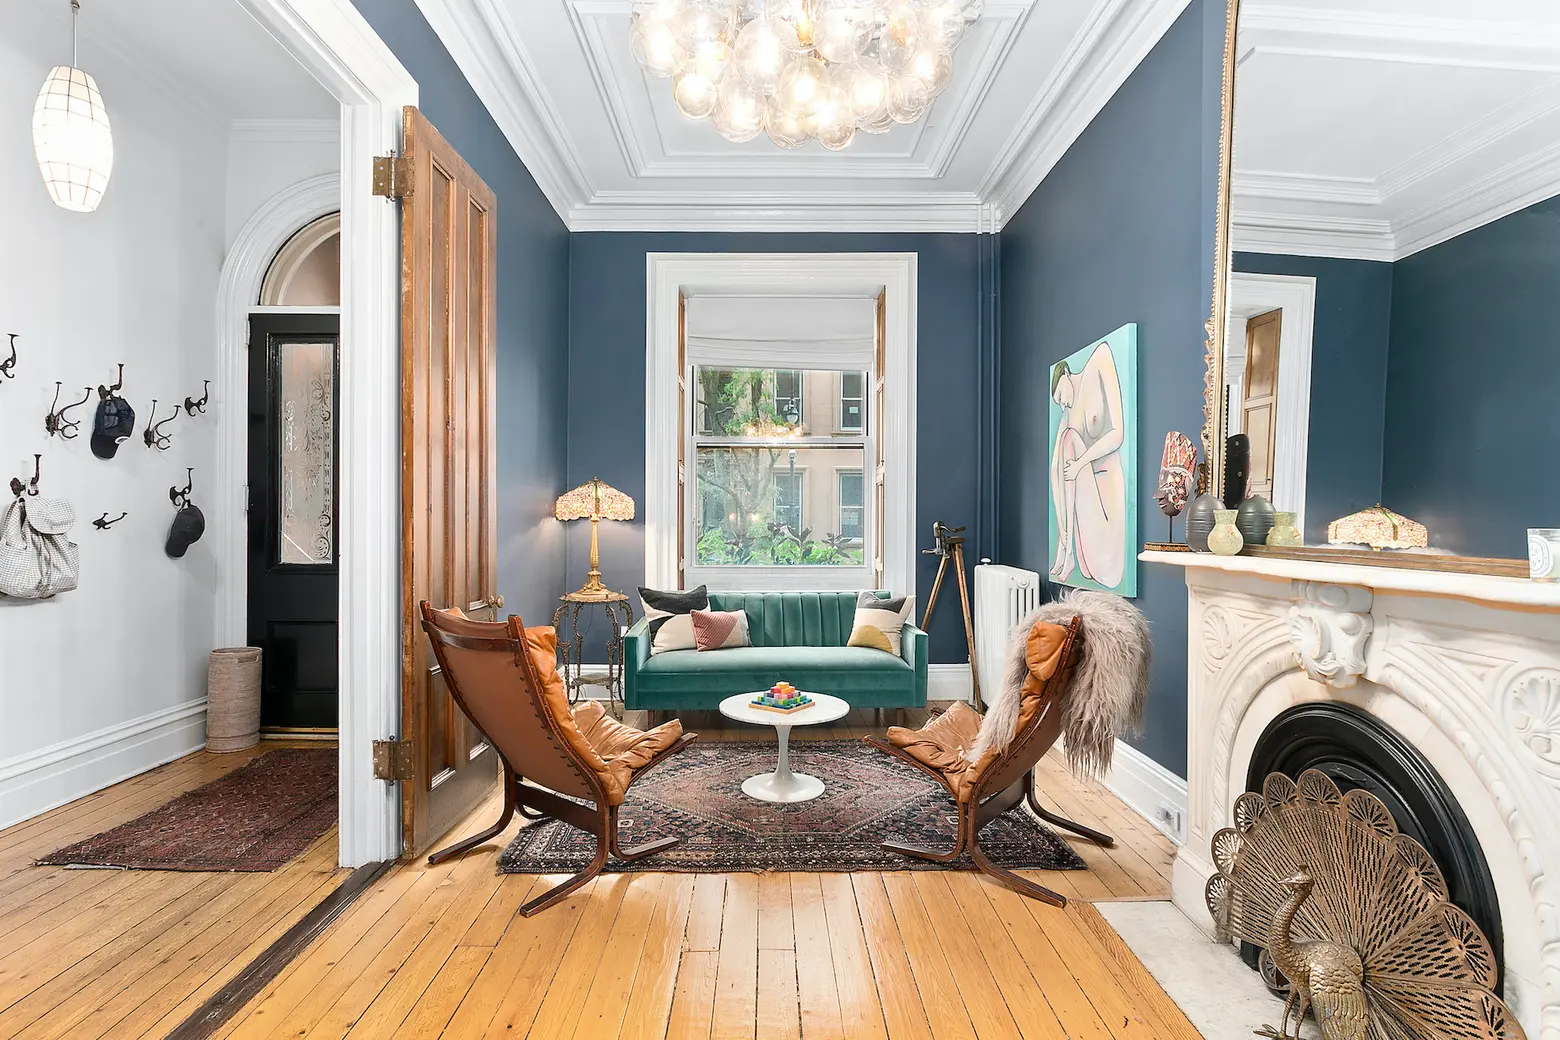 This $4.5M Carroll Gardens townhouse looks like it’s straight off Pinterest